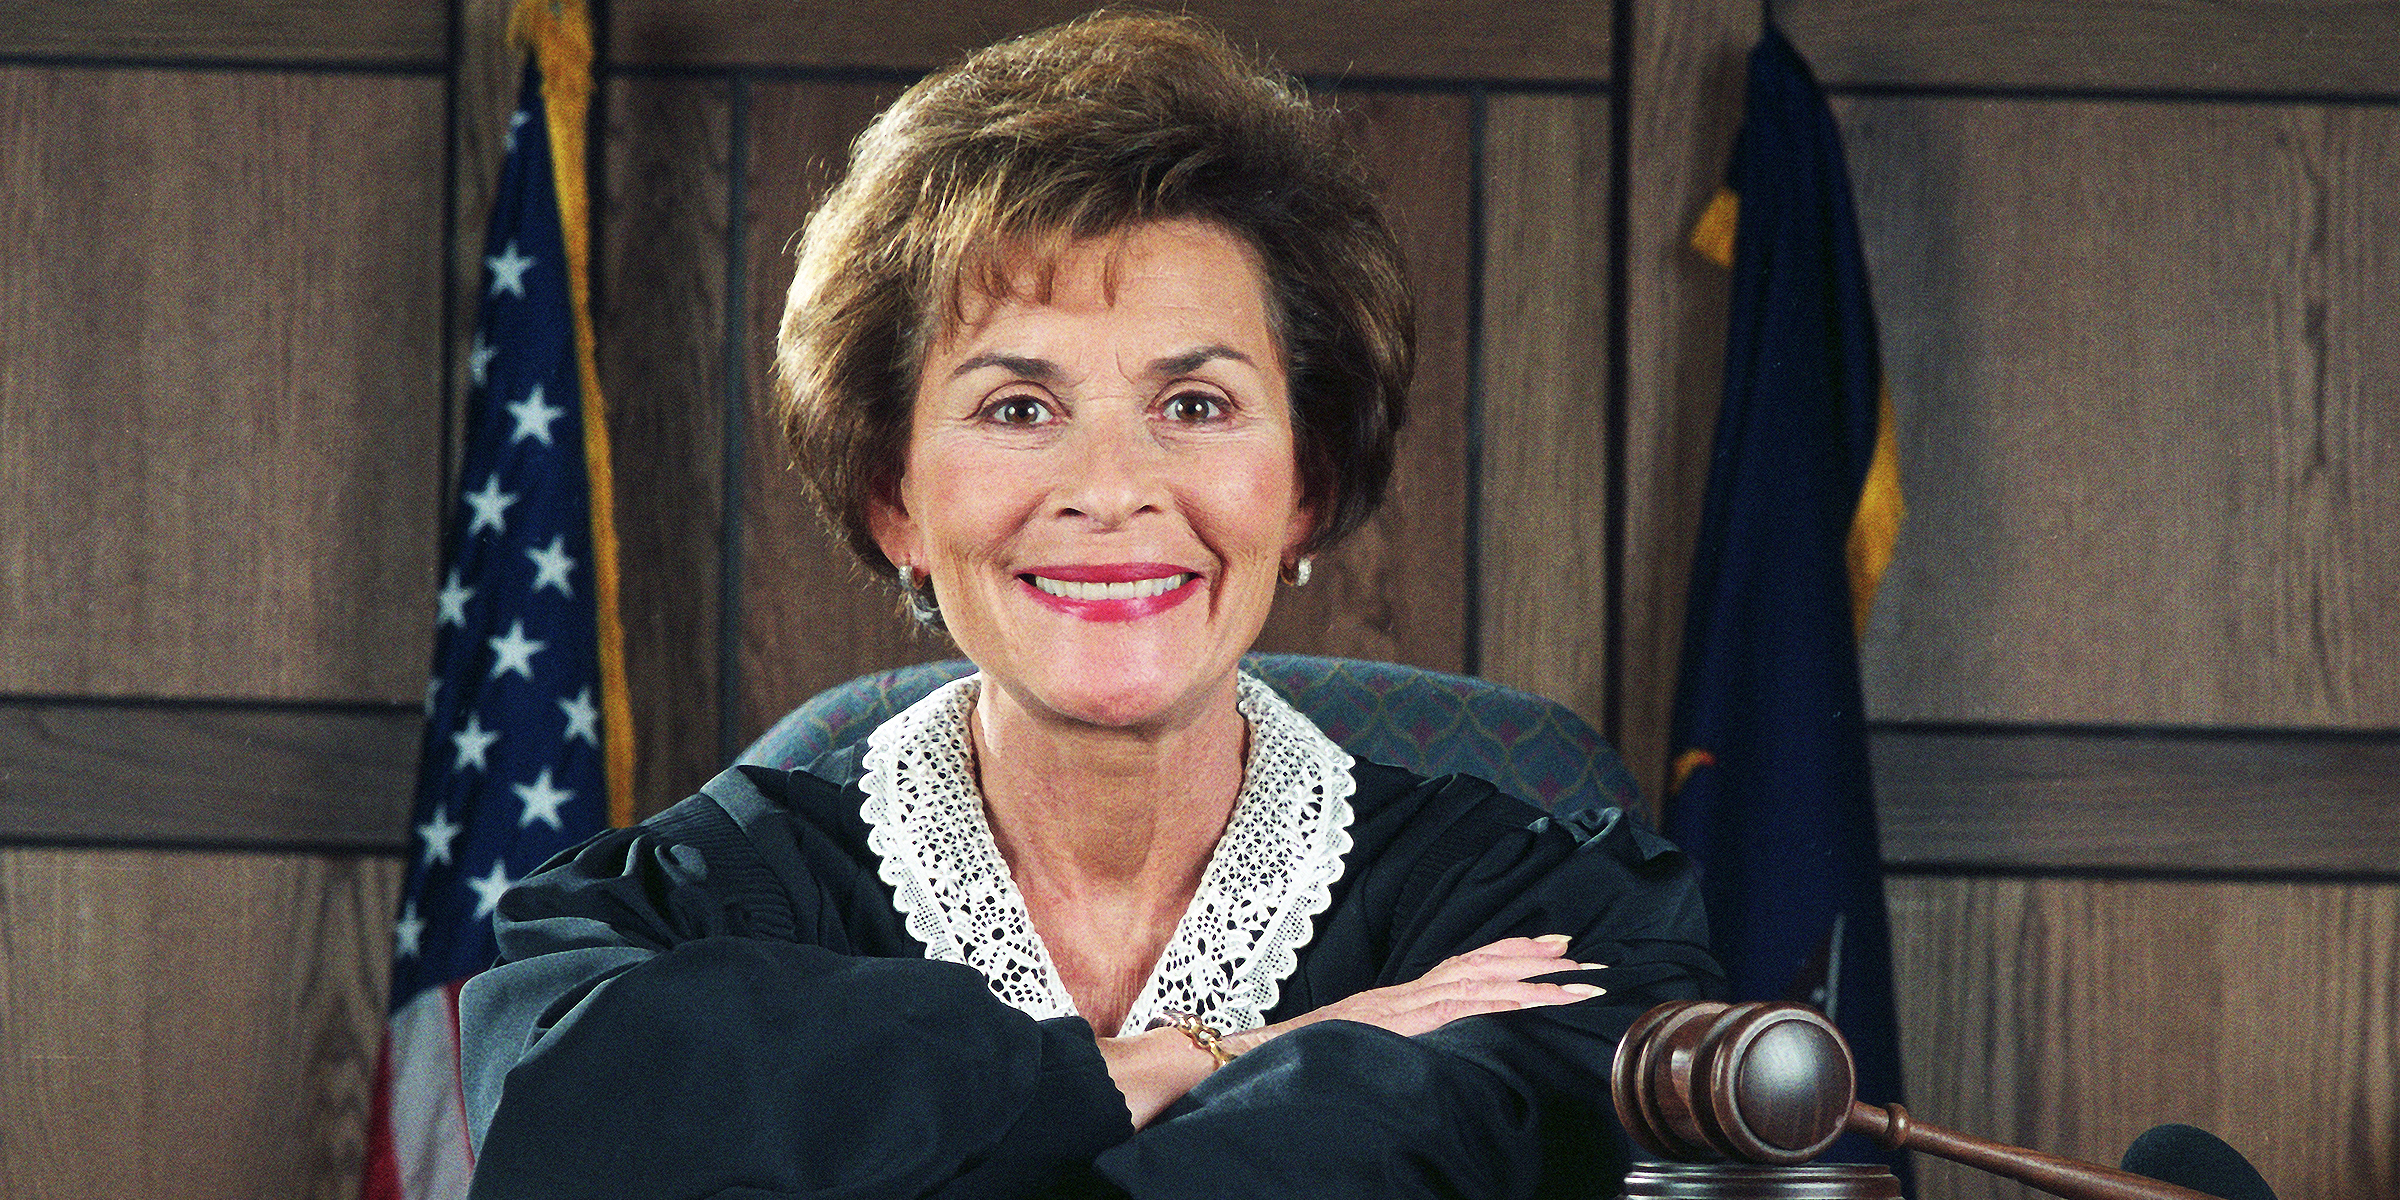 Judge Judy┃Source : Getty Images